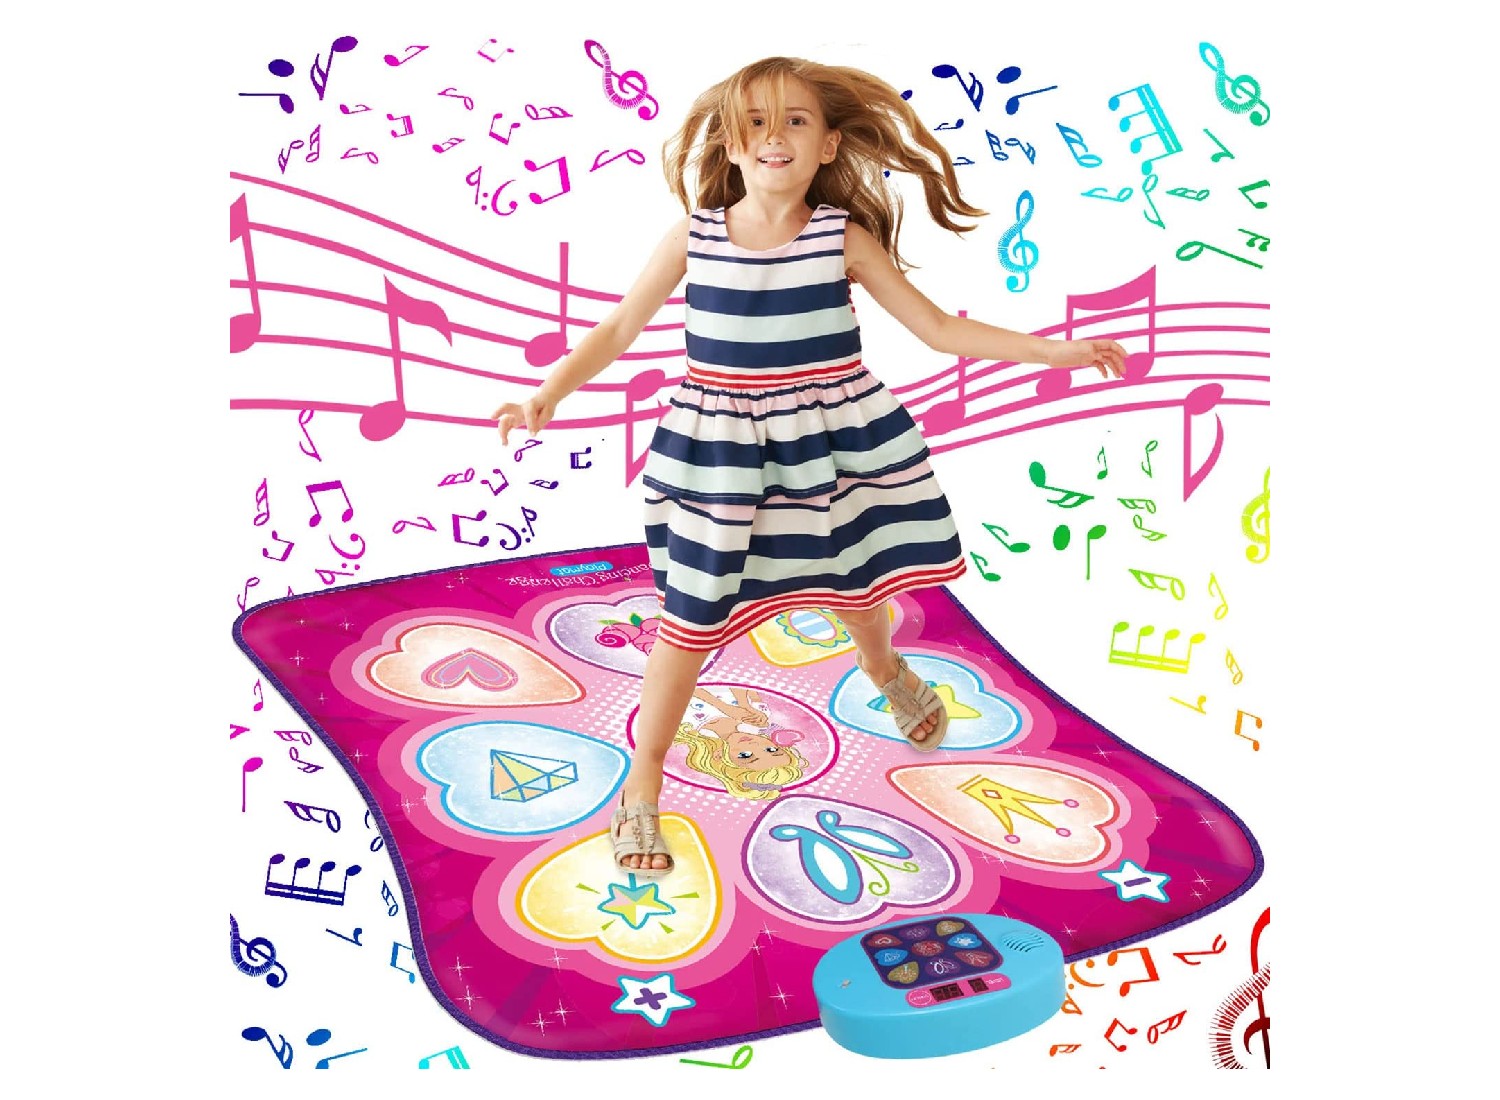 Kids Dance Mat Gift Toys for Girls Boys Anti-Slip Animal Dancing Mat for Kids Ages 3 4 5 6 7 8 9 10+ Year Old Girls Dance Pad 3 Built-in Music Adjustable Volume Dance Playmat with 3 Levels 